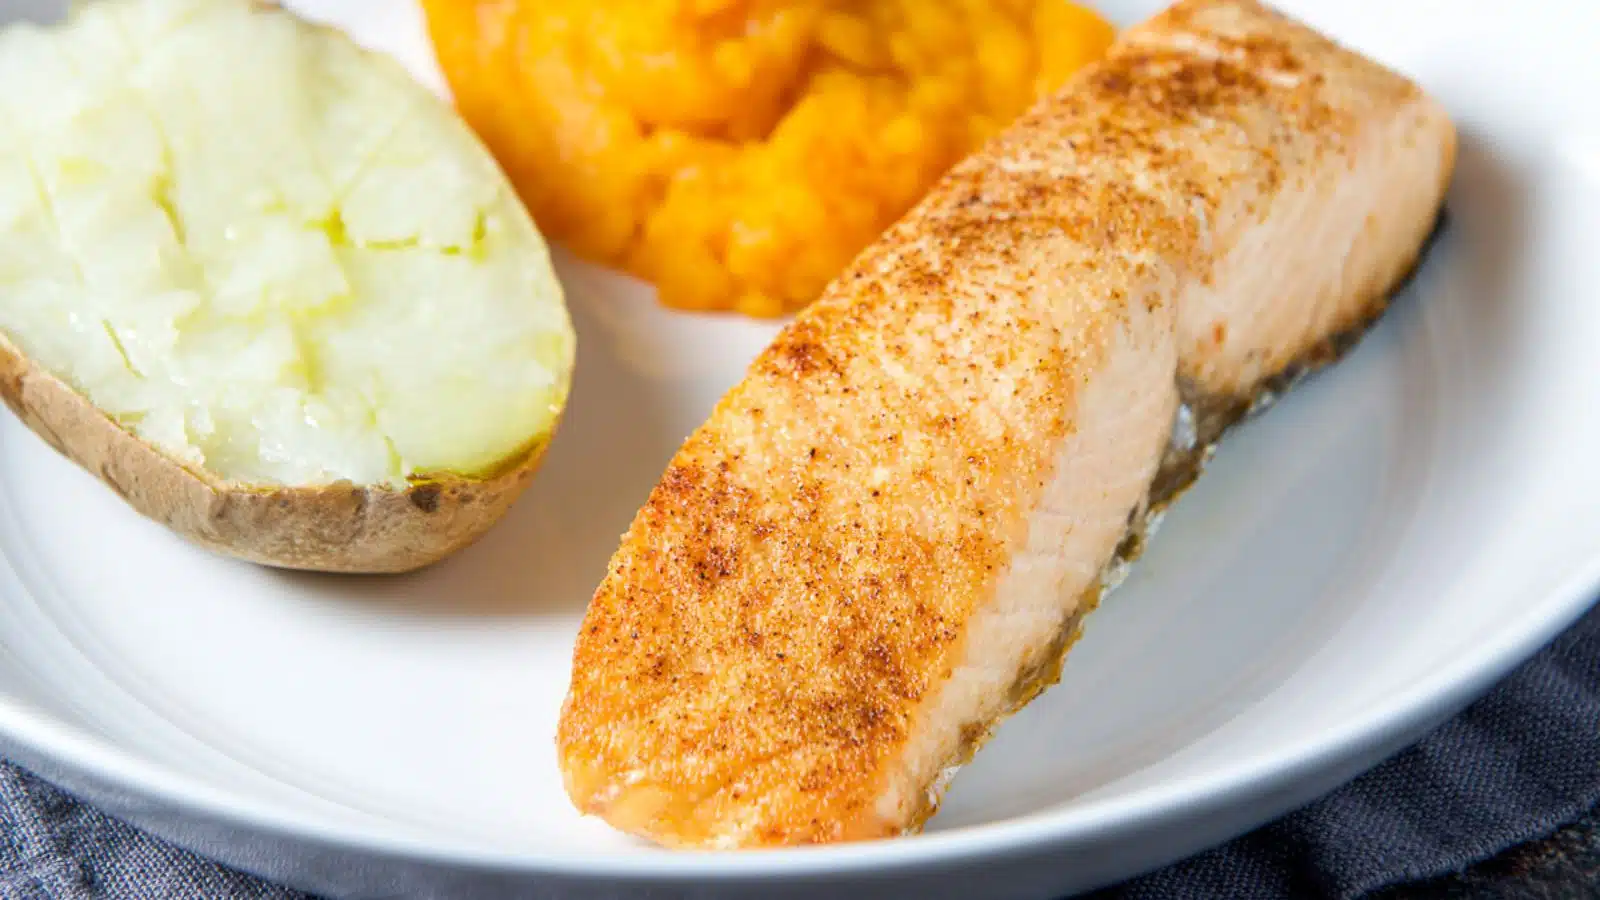 Potato and squash on a plate with the salmon